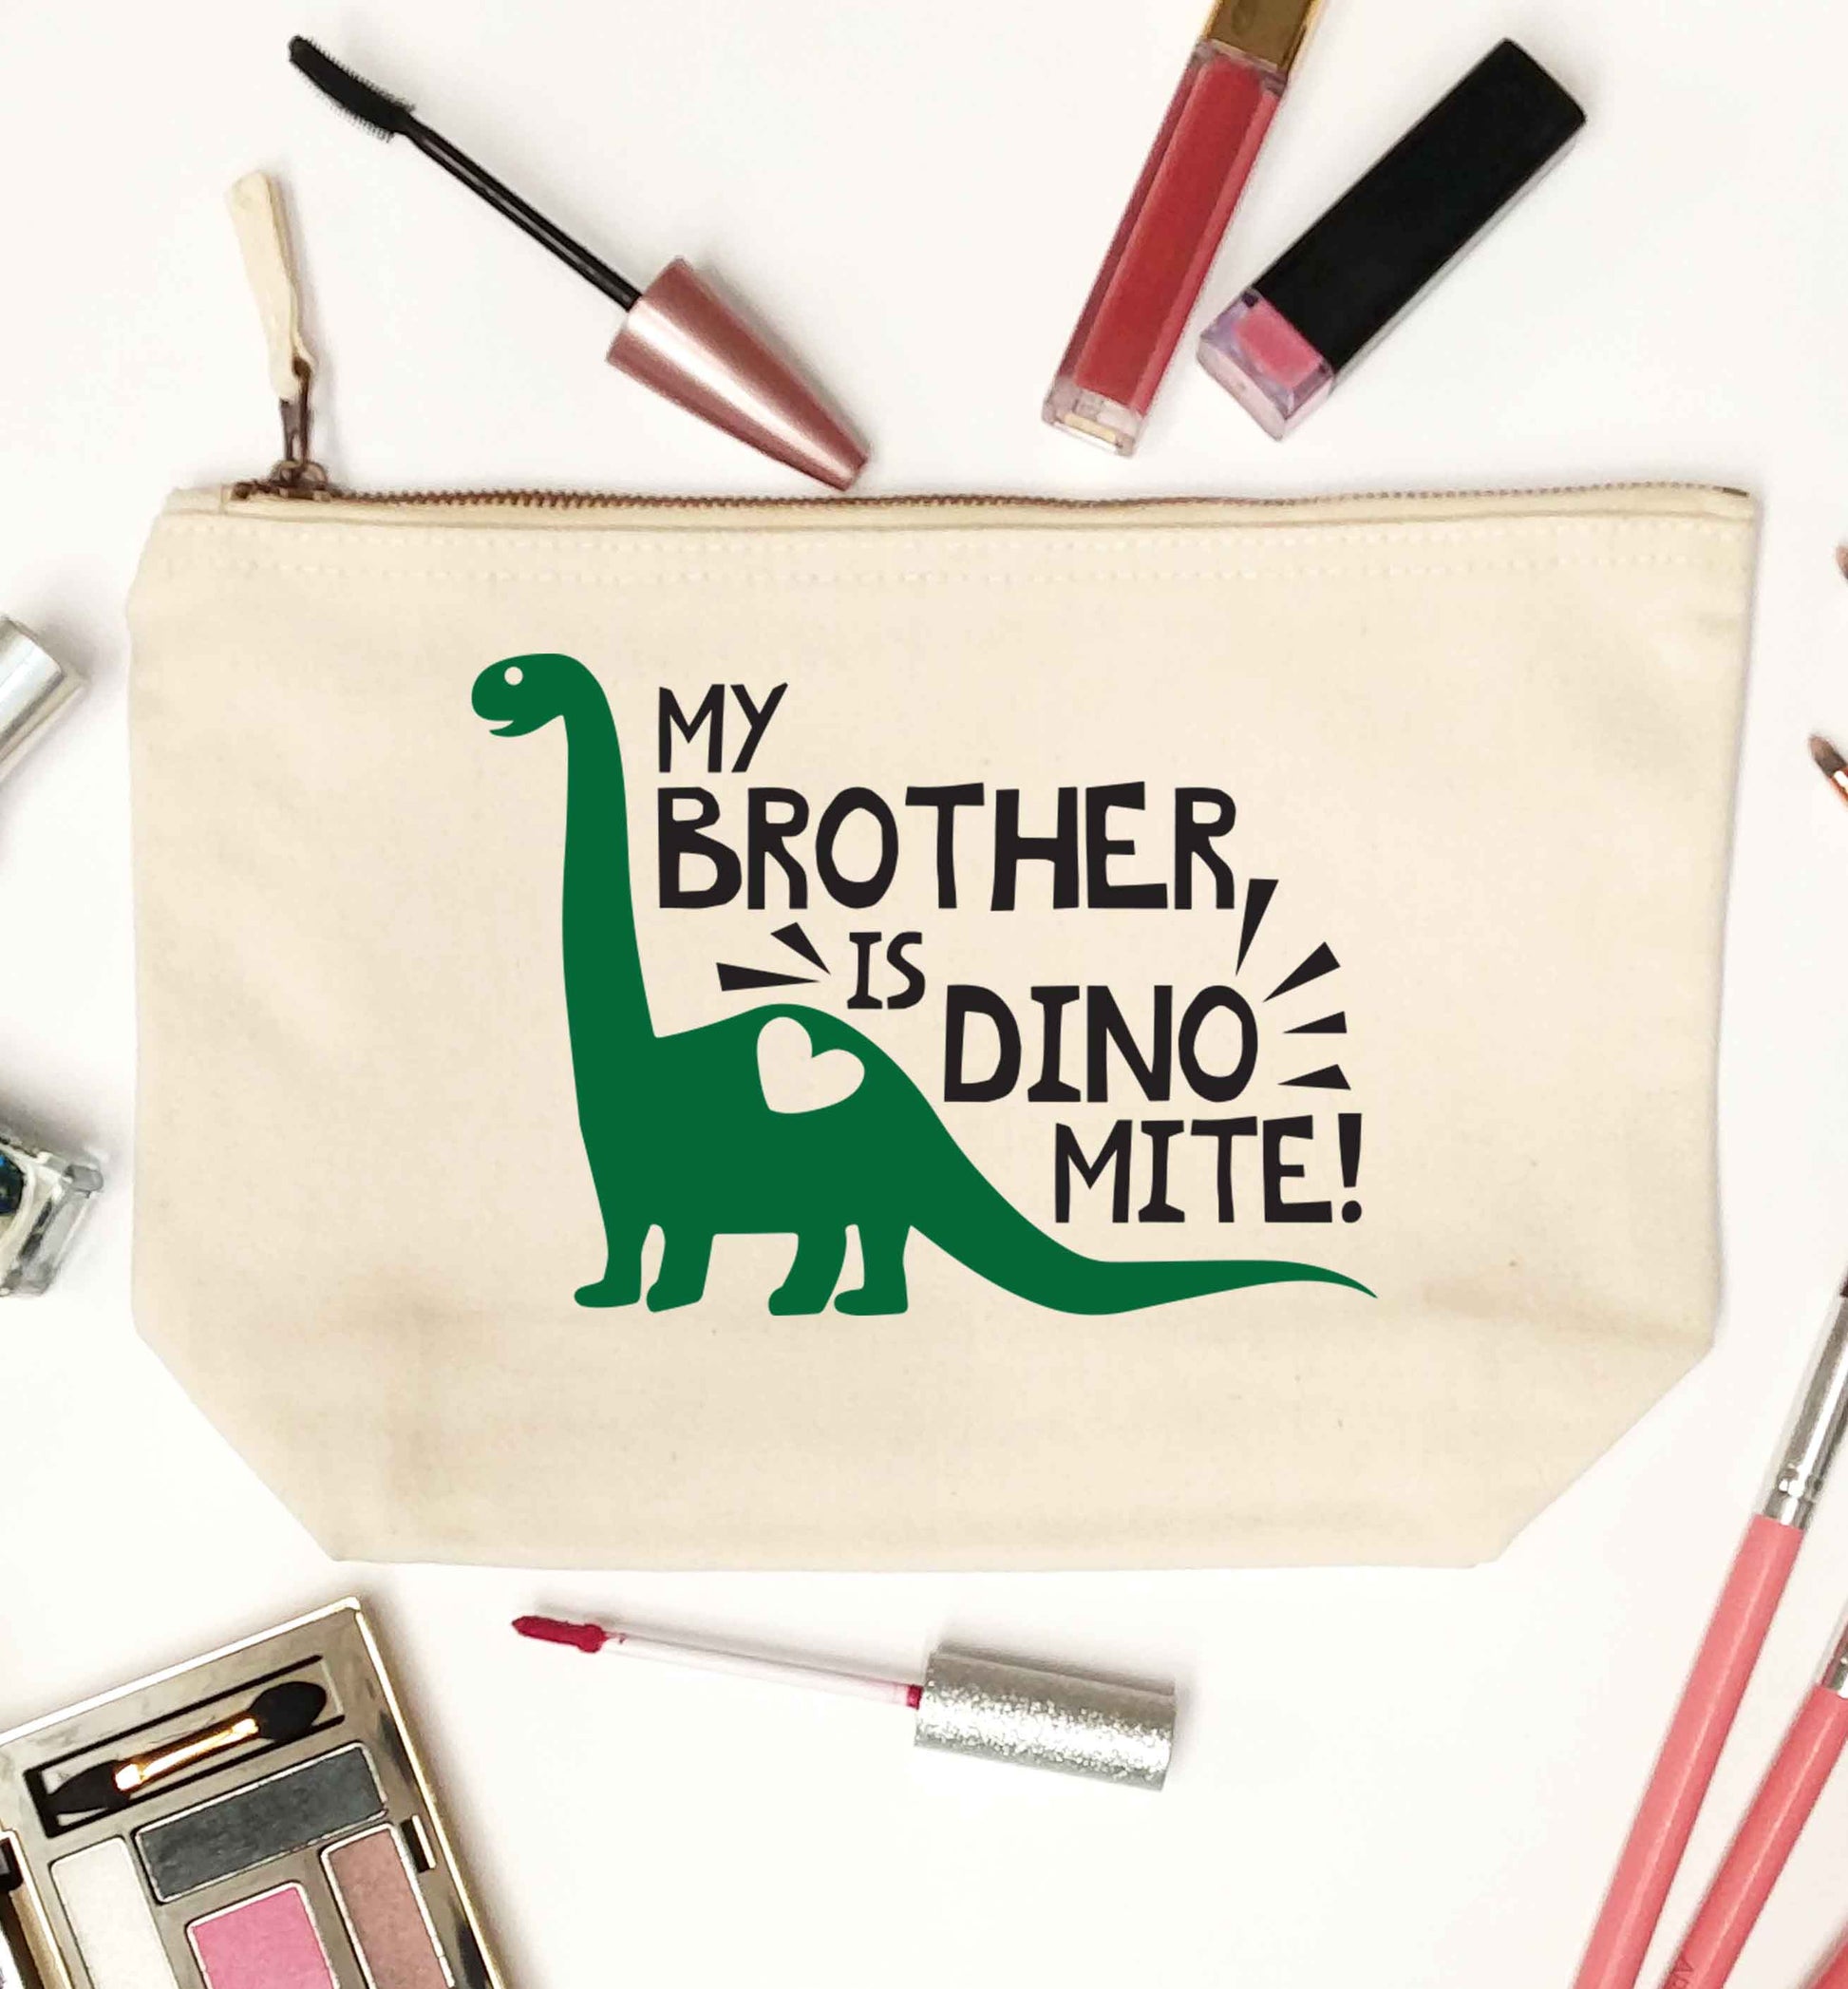 My brother is dinomite! natural makeup bag